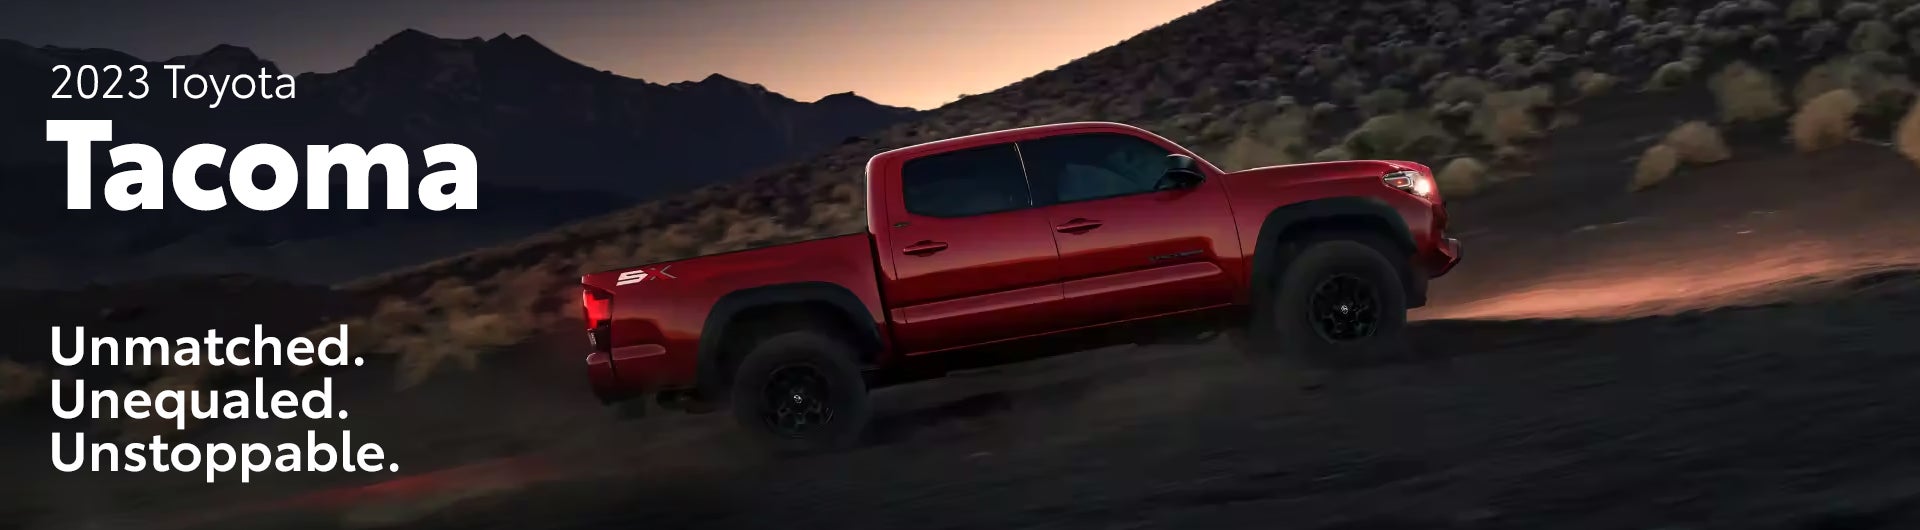 A New 2023 Toyota Tacoma at Simi Valley Toyota in Simi Valley, CA